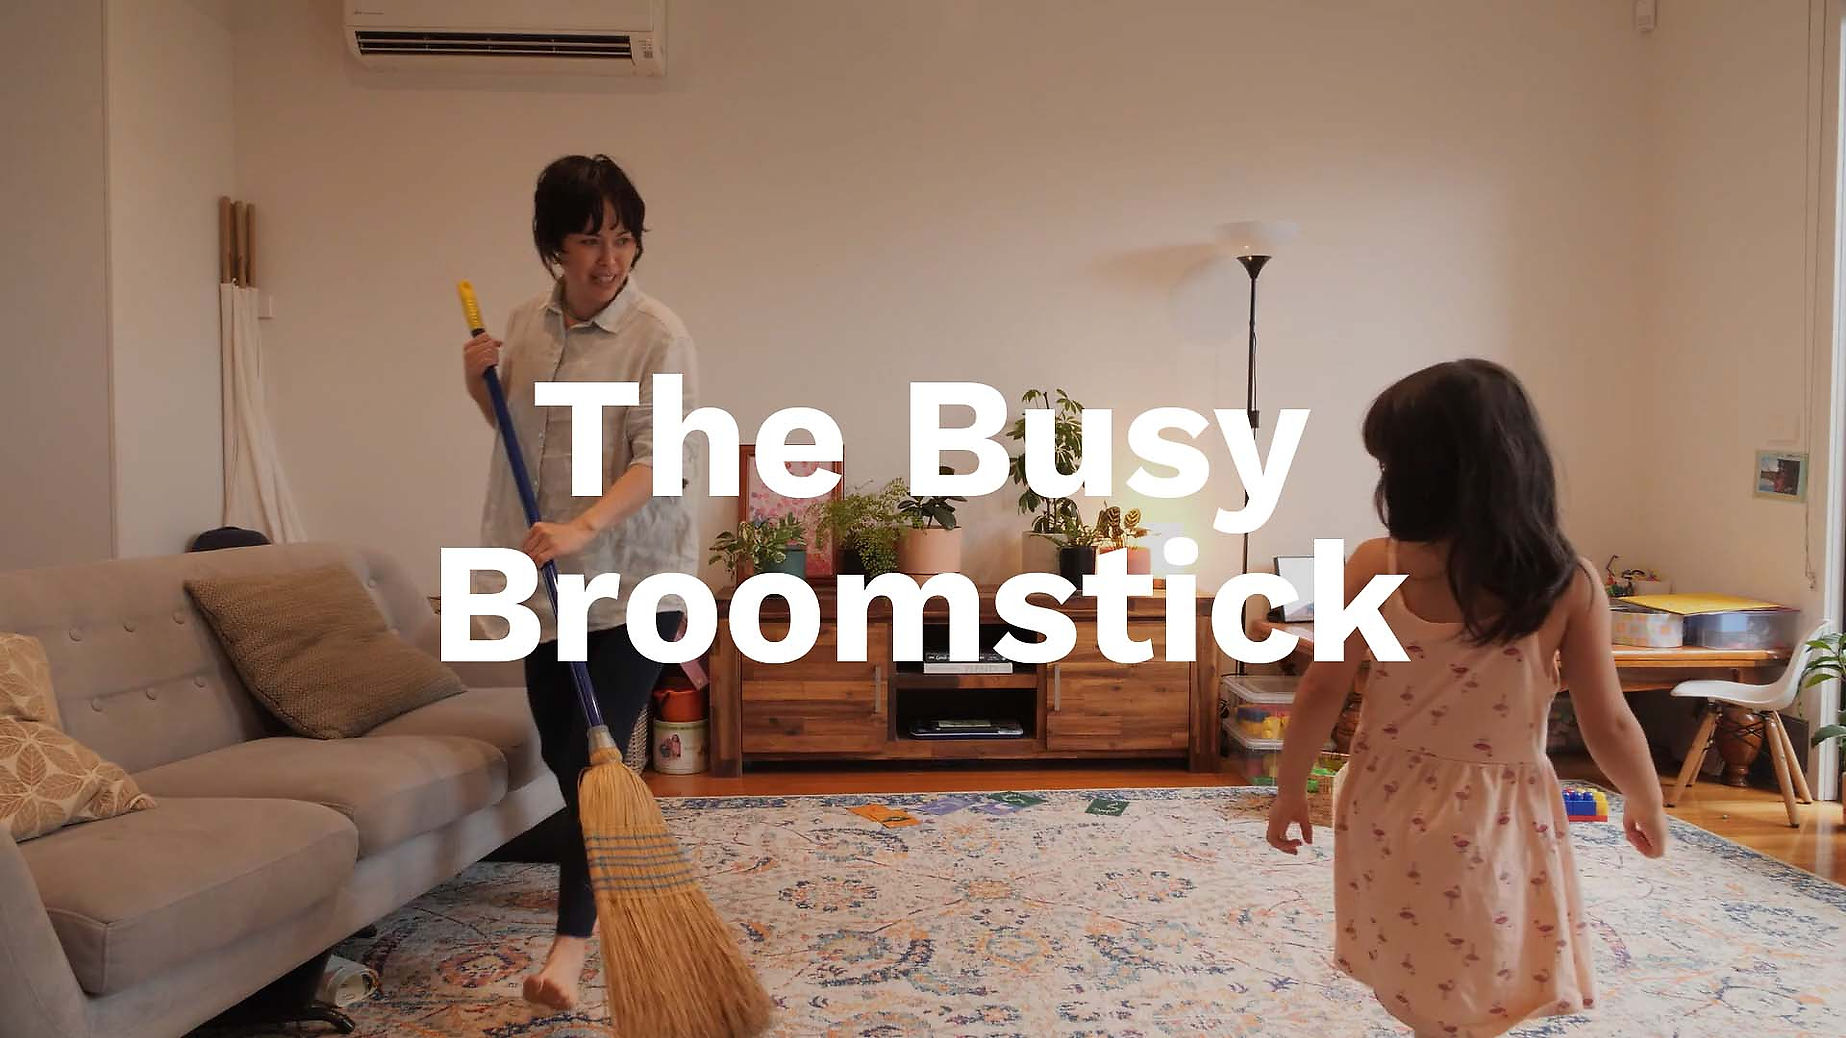 The Busy Broomstick